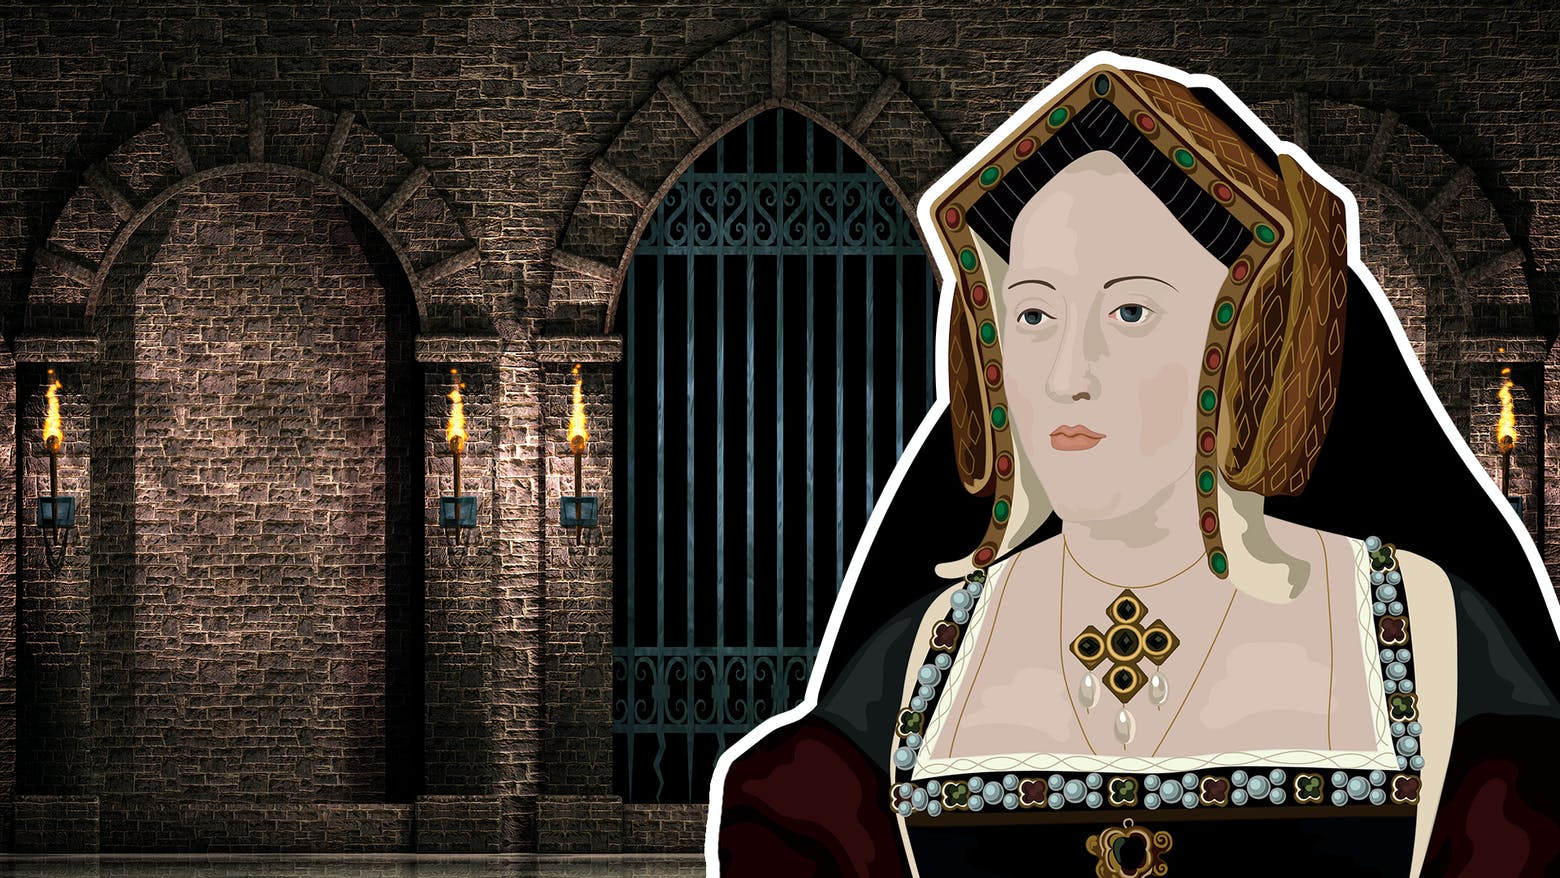 One of Henry VIII's wives